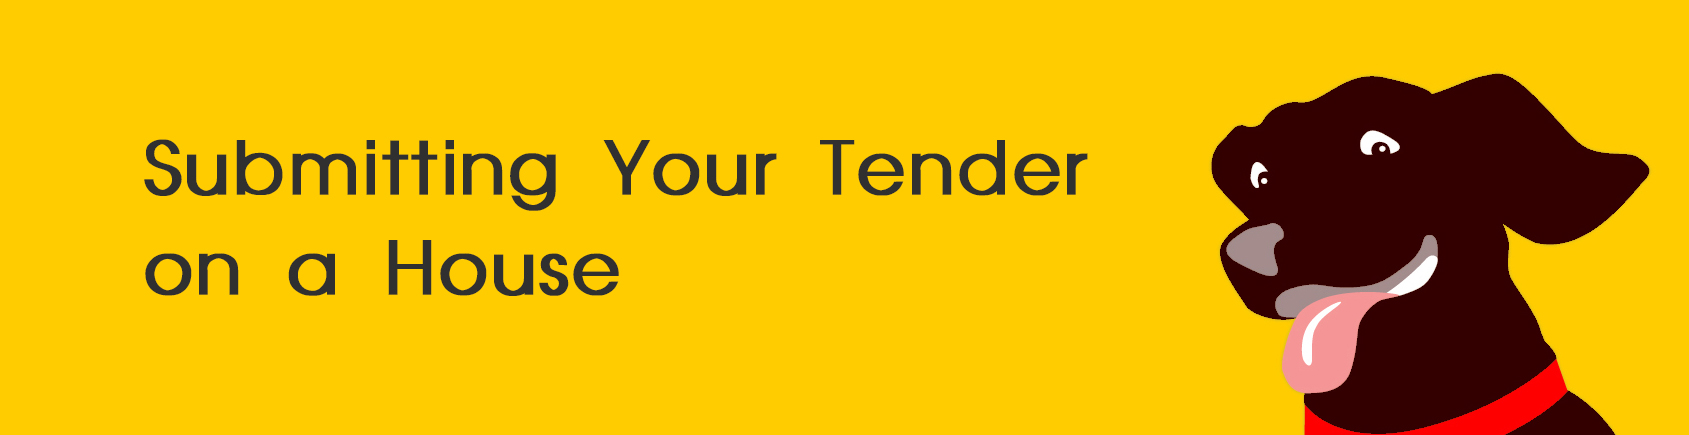 Making a Tender on a House